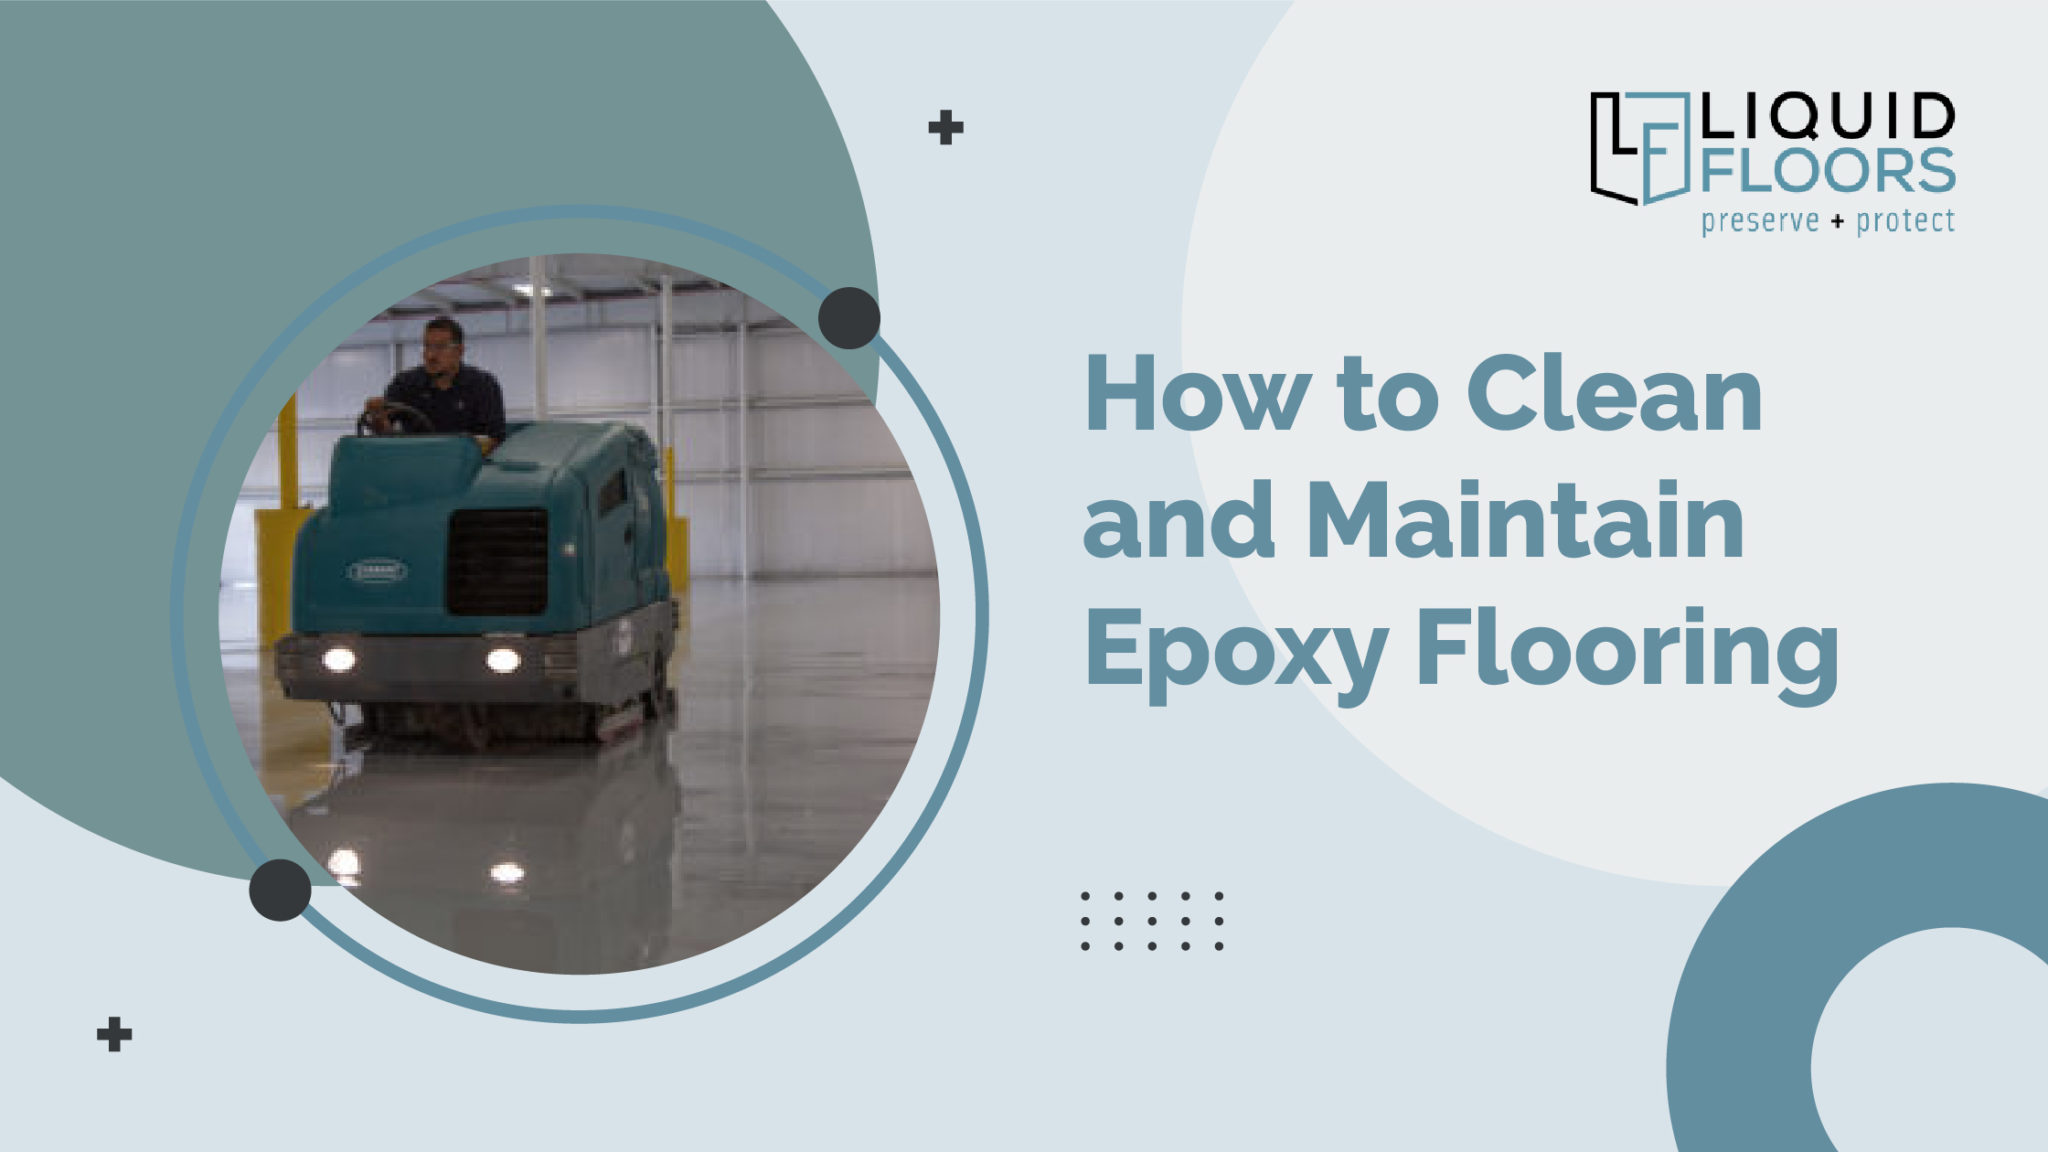 Natural Solution for Cleaning Epoxy Resin